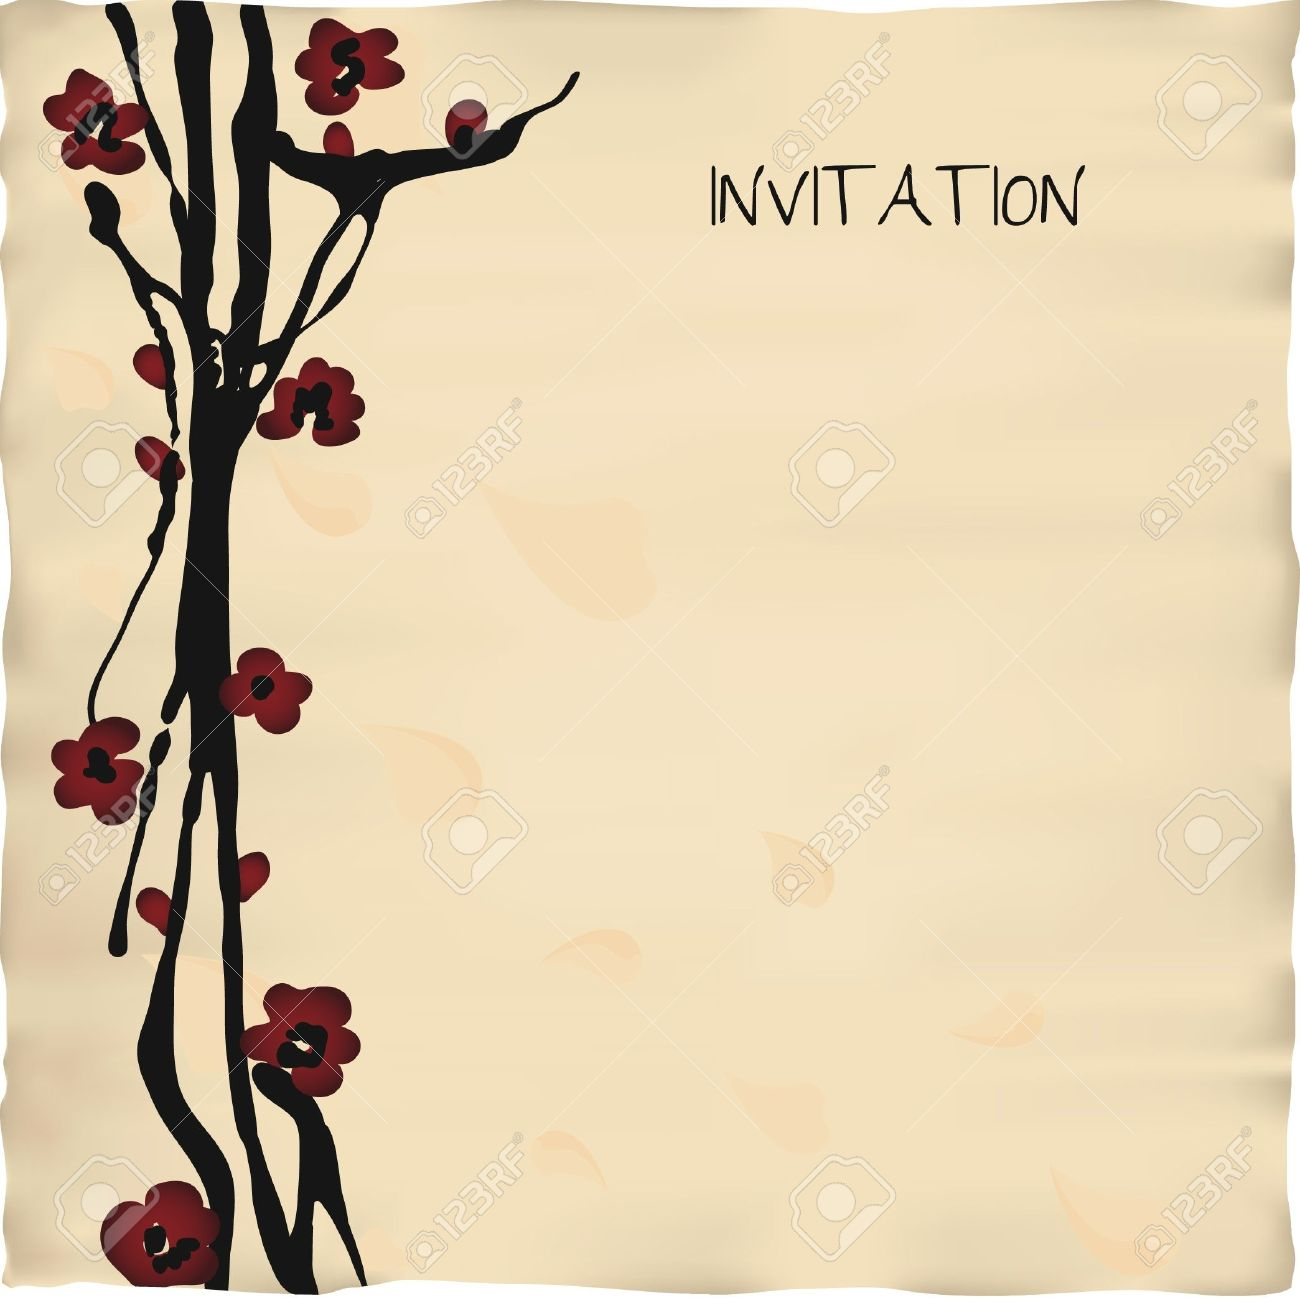 Japanese Or Chinese Style Invitation Card Template Royalty Free intended for sizing 1300 X 1298